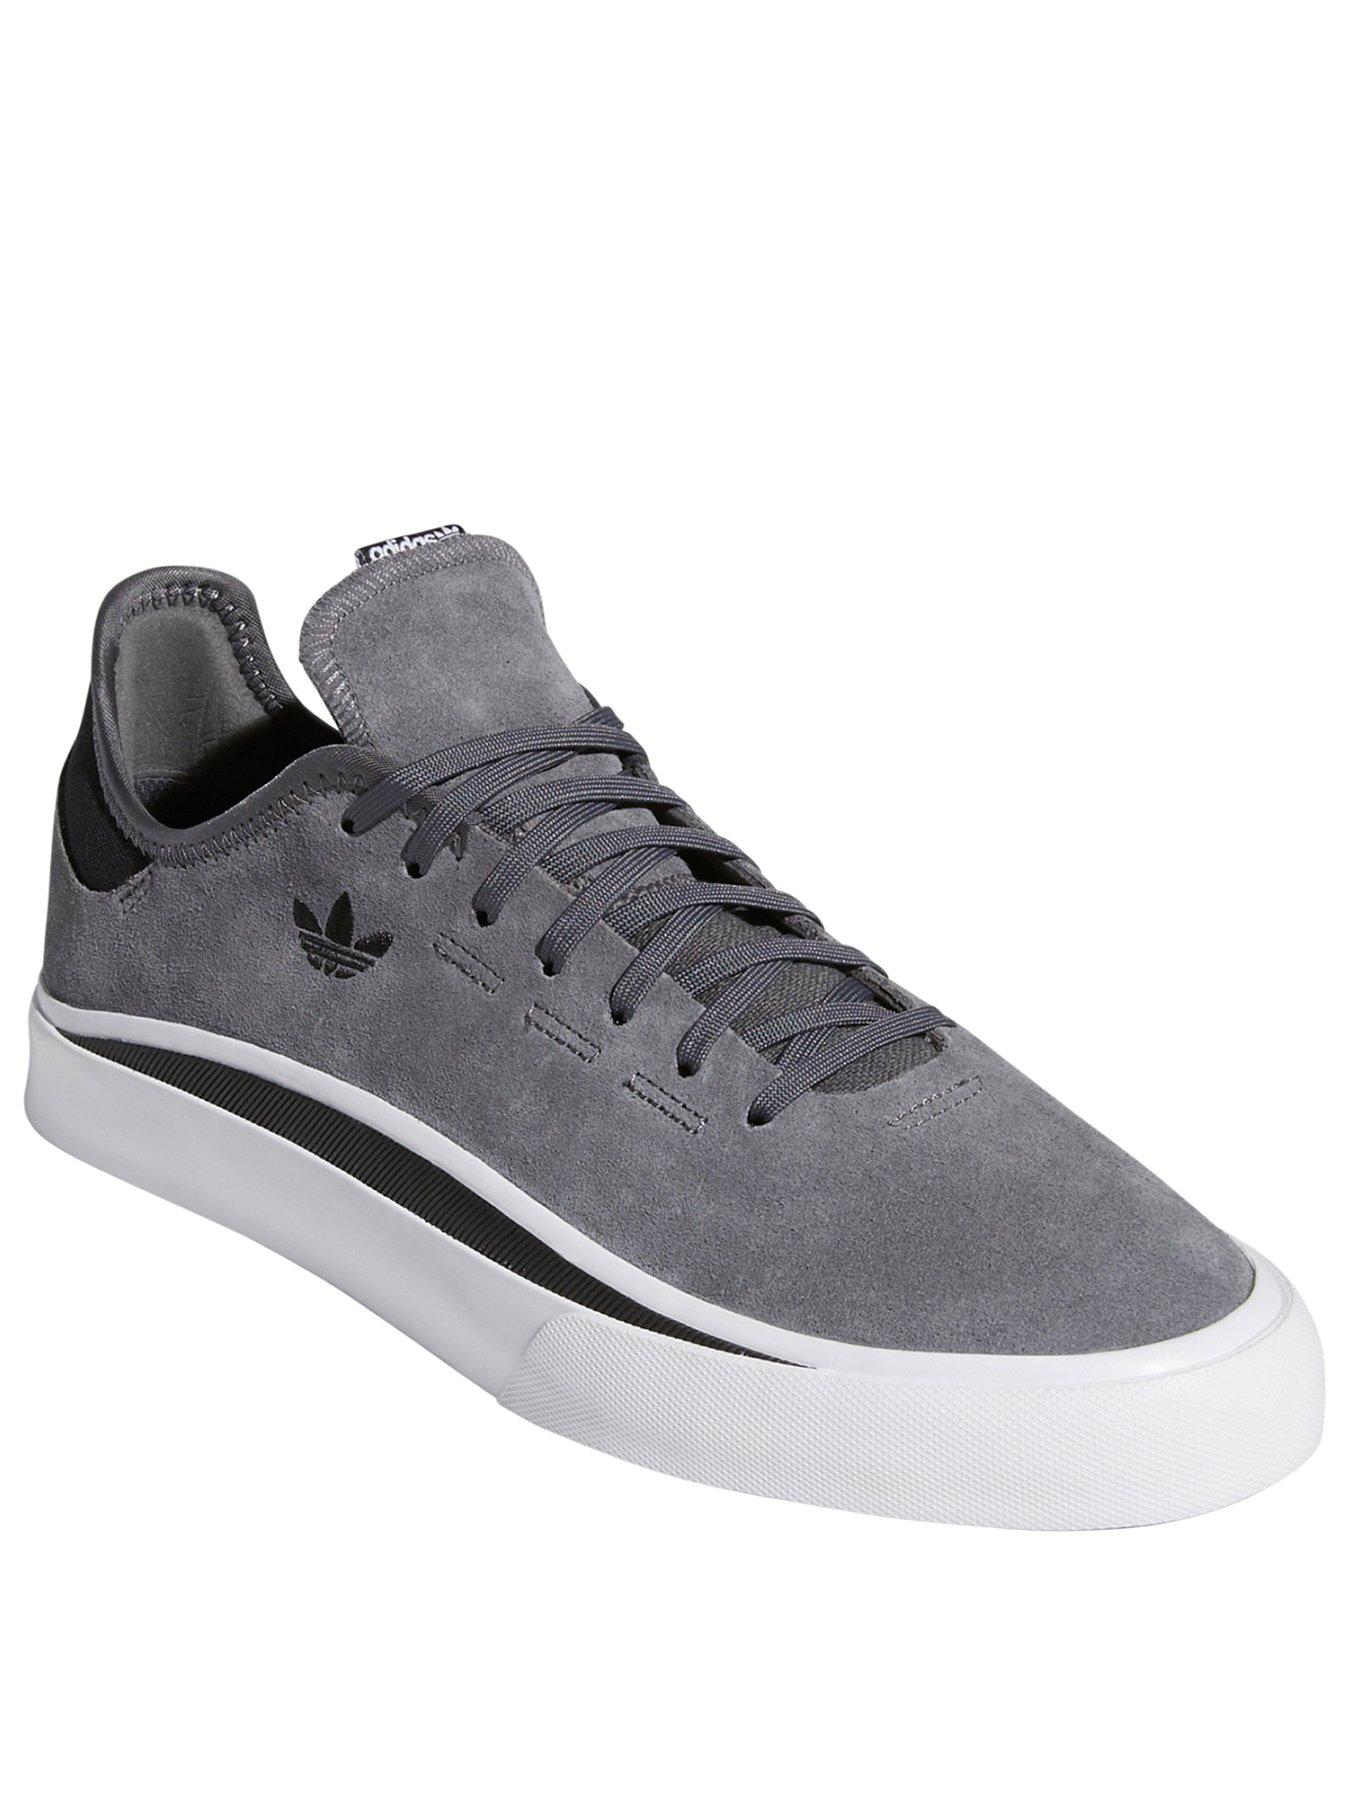 adidas originals sabalo trainers in grey and purple